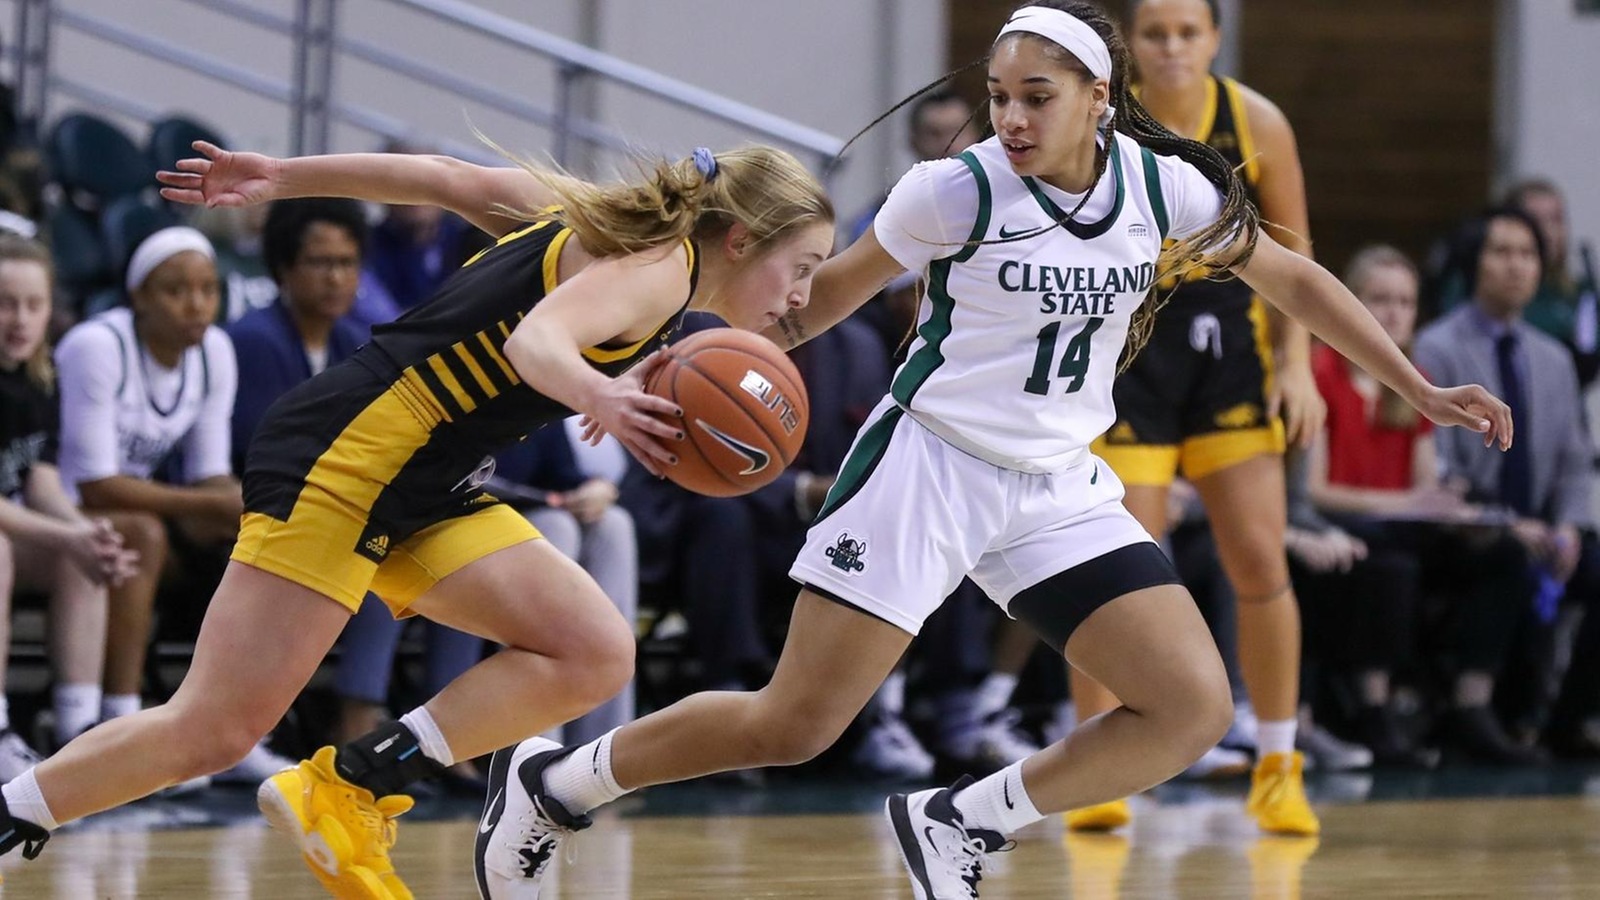 White Named #HLWBB Defensive Player of the Year; Miller & Crockett Named All-League